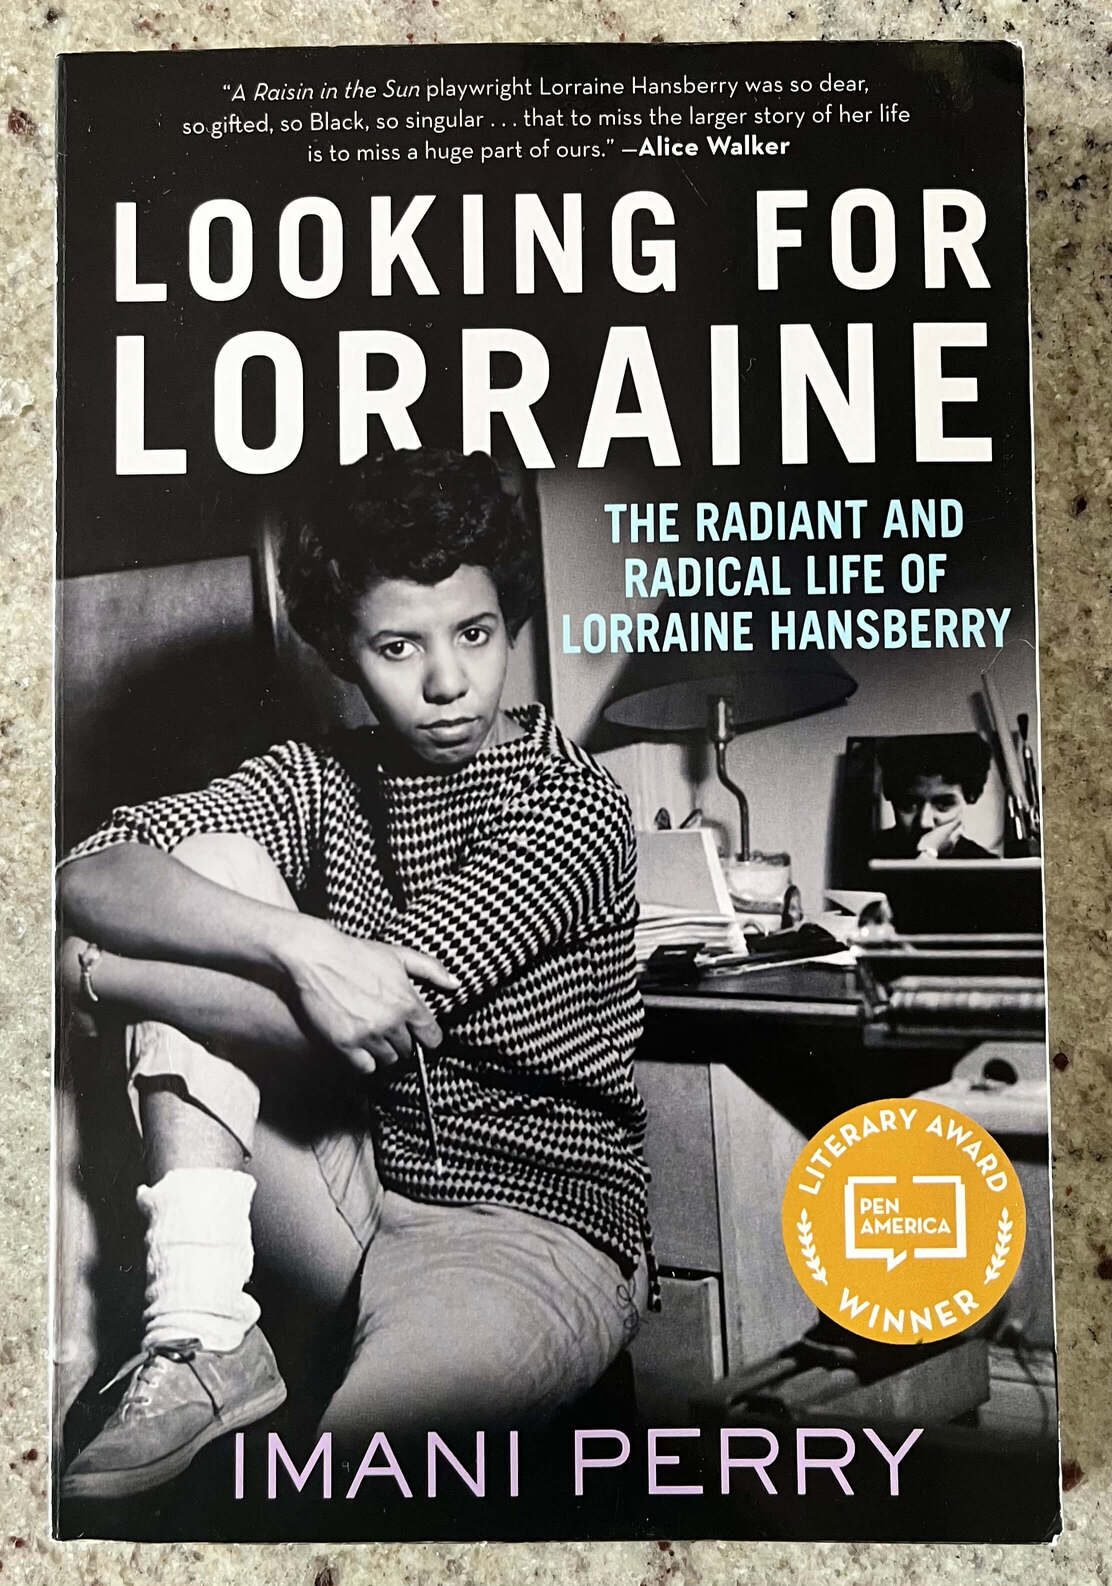 “Looking For Lorraine The Radiant And Radical Life Of Lorraine Hansberry” by Imani Perry.